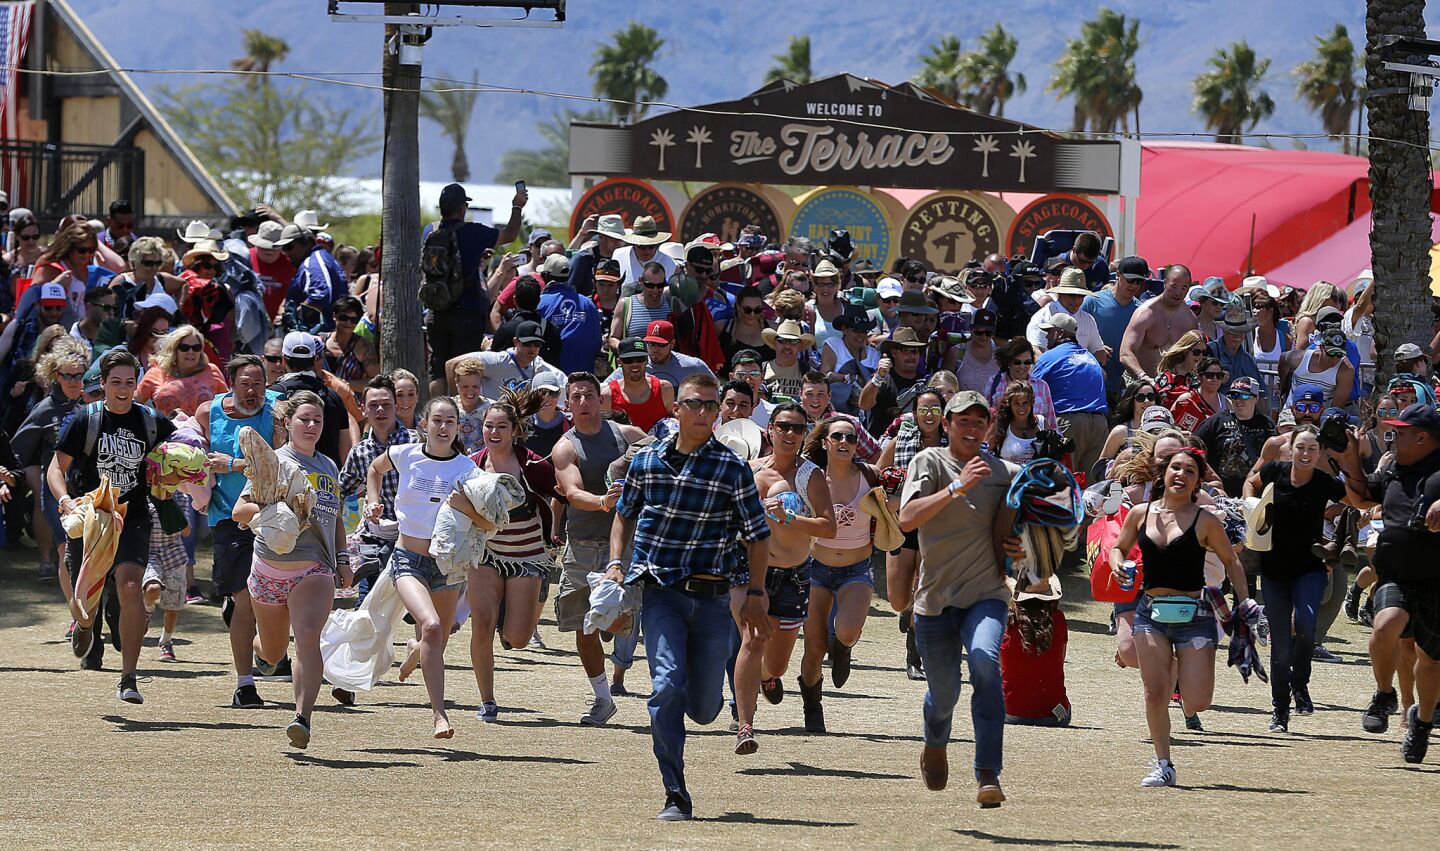 Country music fans dash out from behind gates to get the best concert viewing seats as they arrive on the second day of the 10th edition of Stagecoach Country Music Festival at the Empire Polo Club in Indio on April 30.